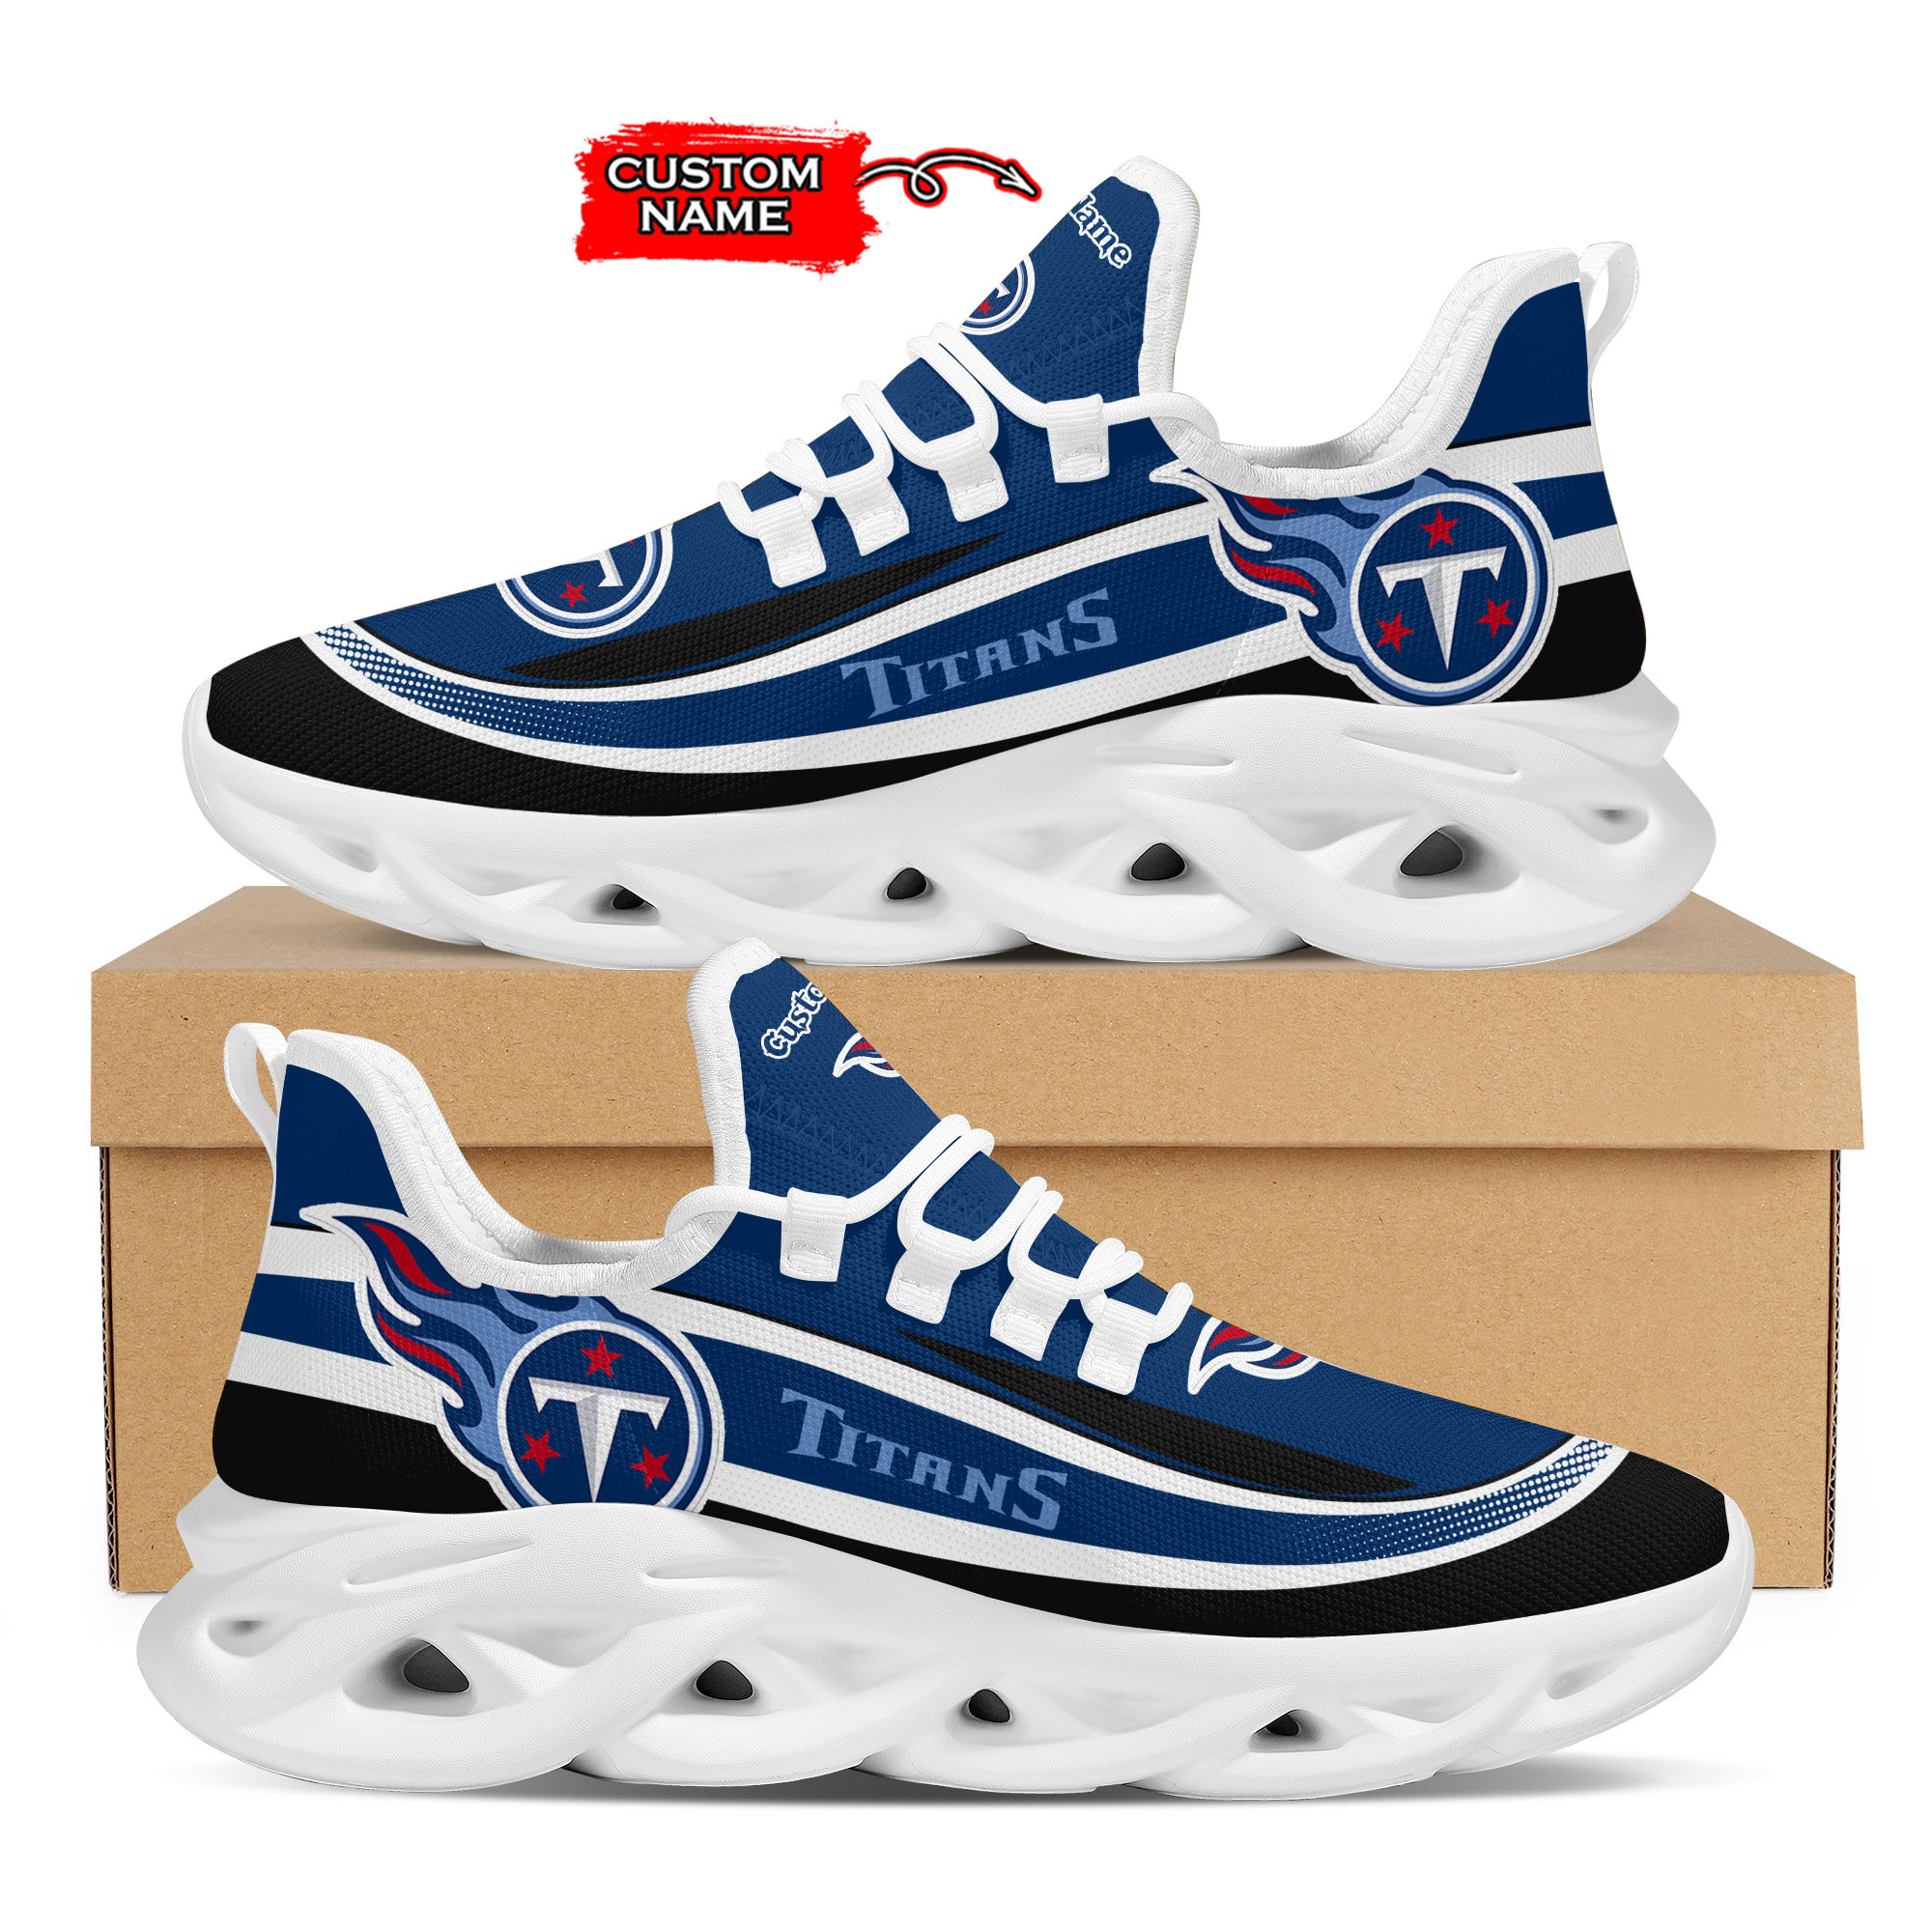 Tennessee Titans Nfl Custom Name Clunky Max Soul Shoes Sneakers For Mens Womens Personalized Gifts – Hothot